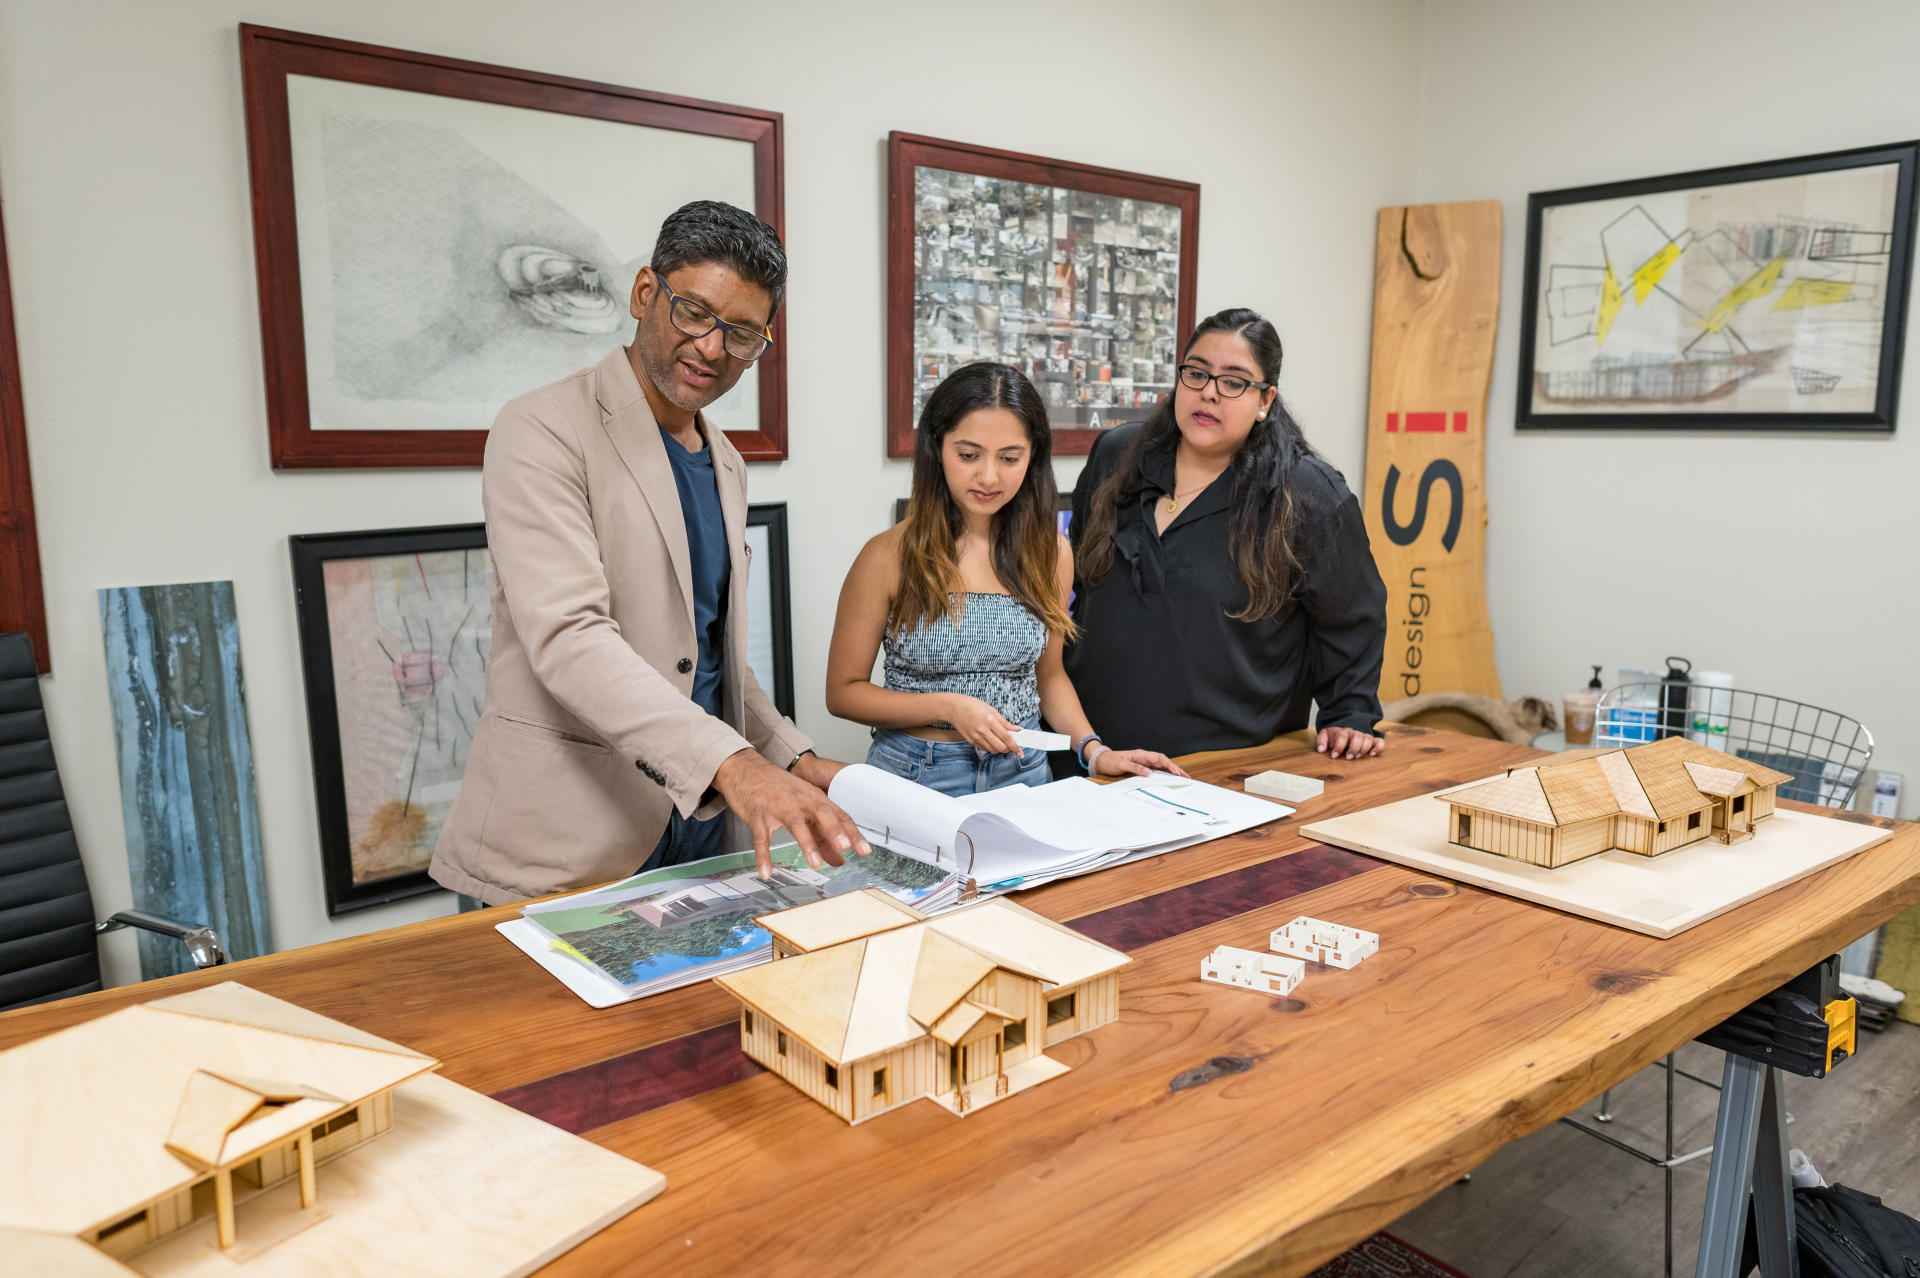 Rouben Mohiuddin, Charvi Grover, and Hira Namit discuss the floorplan designs with wooden models set on the table in front of them.